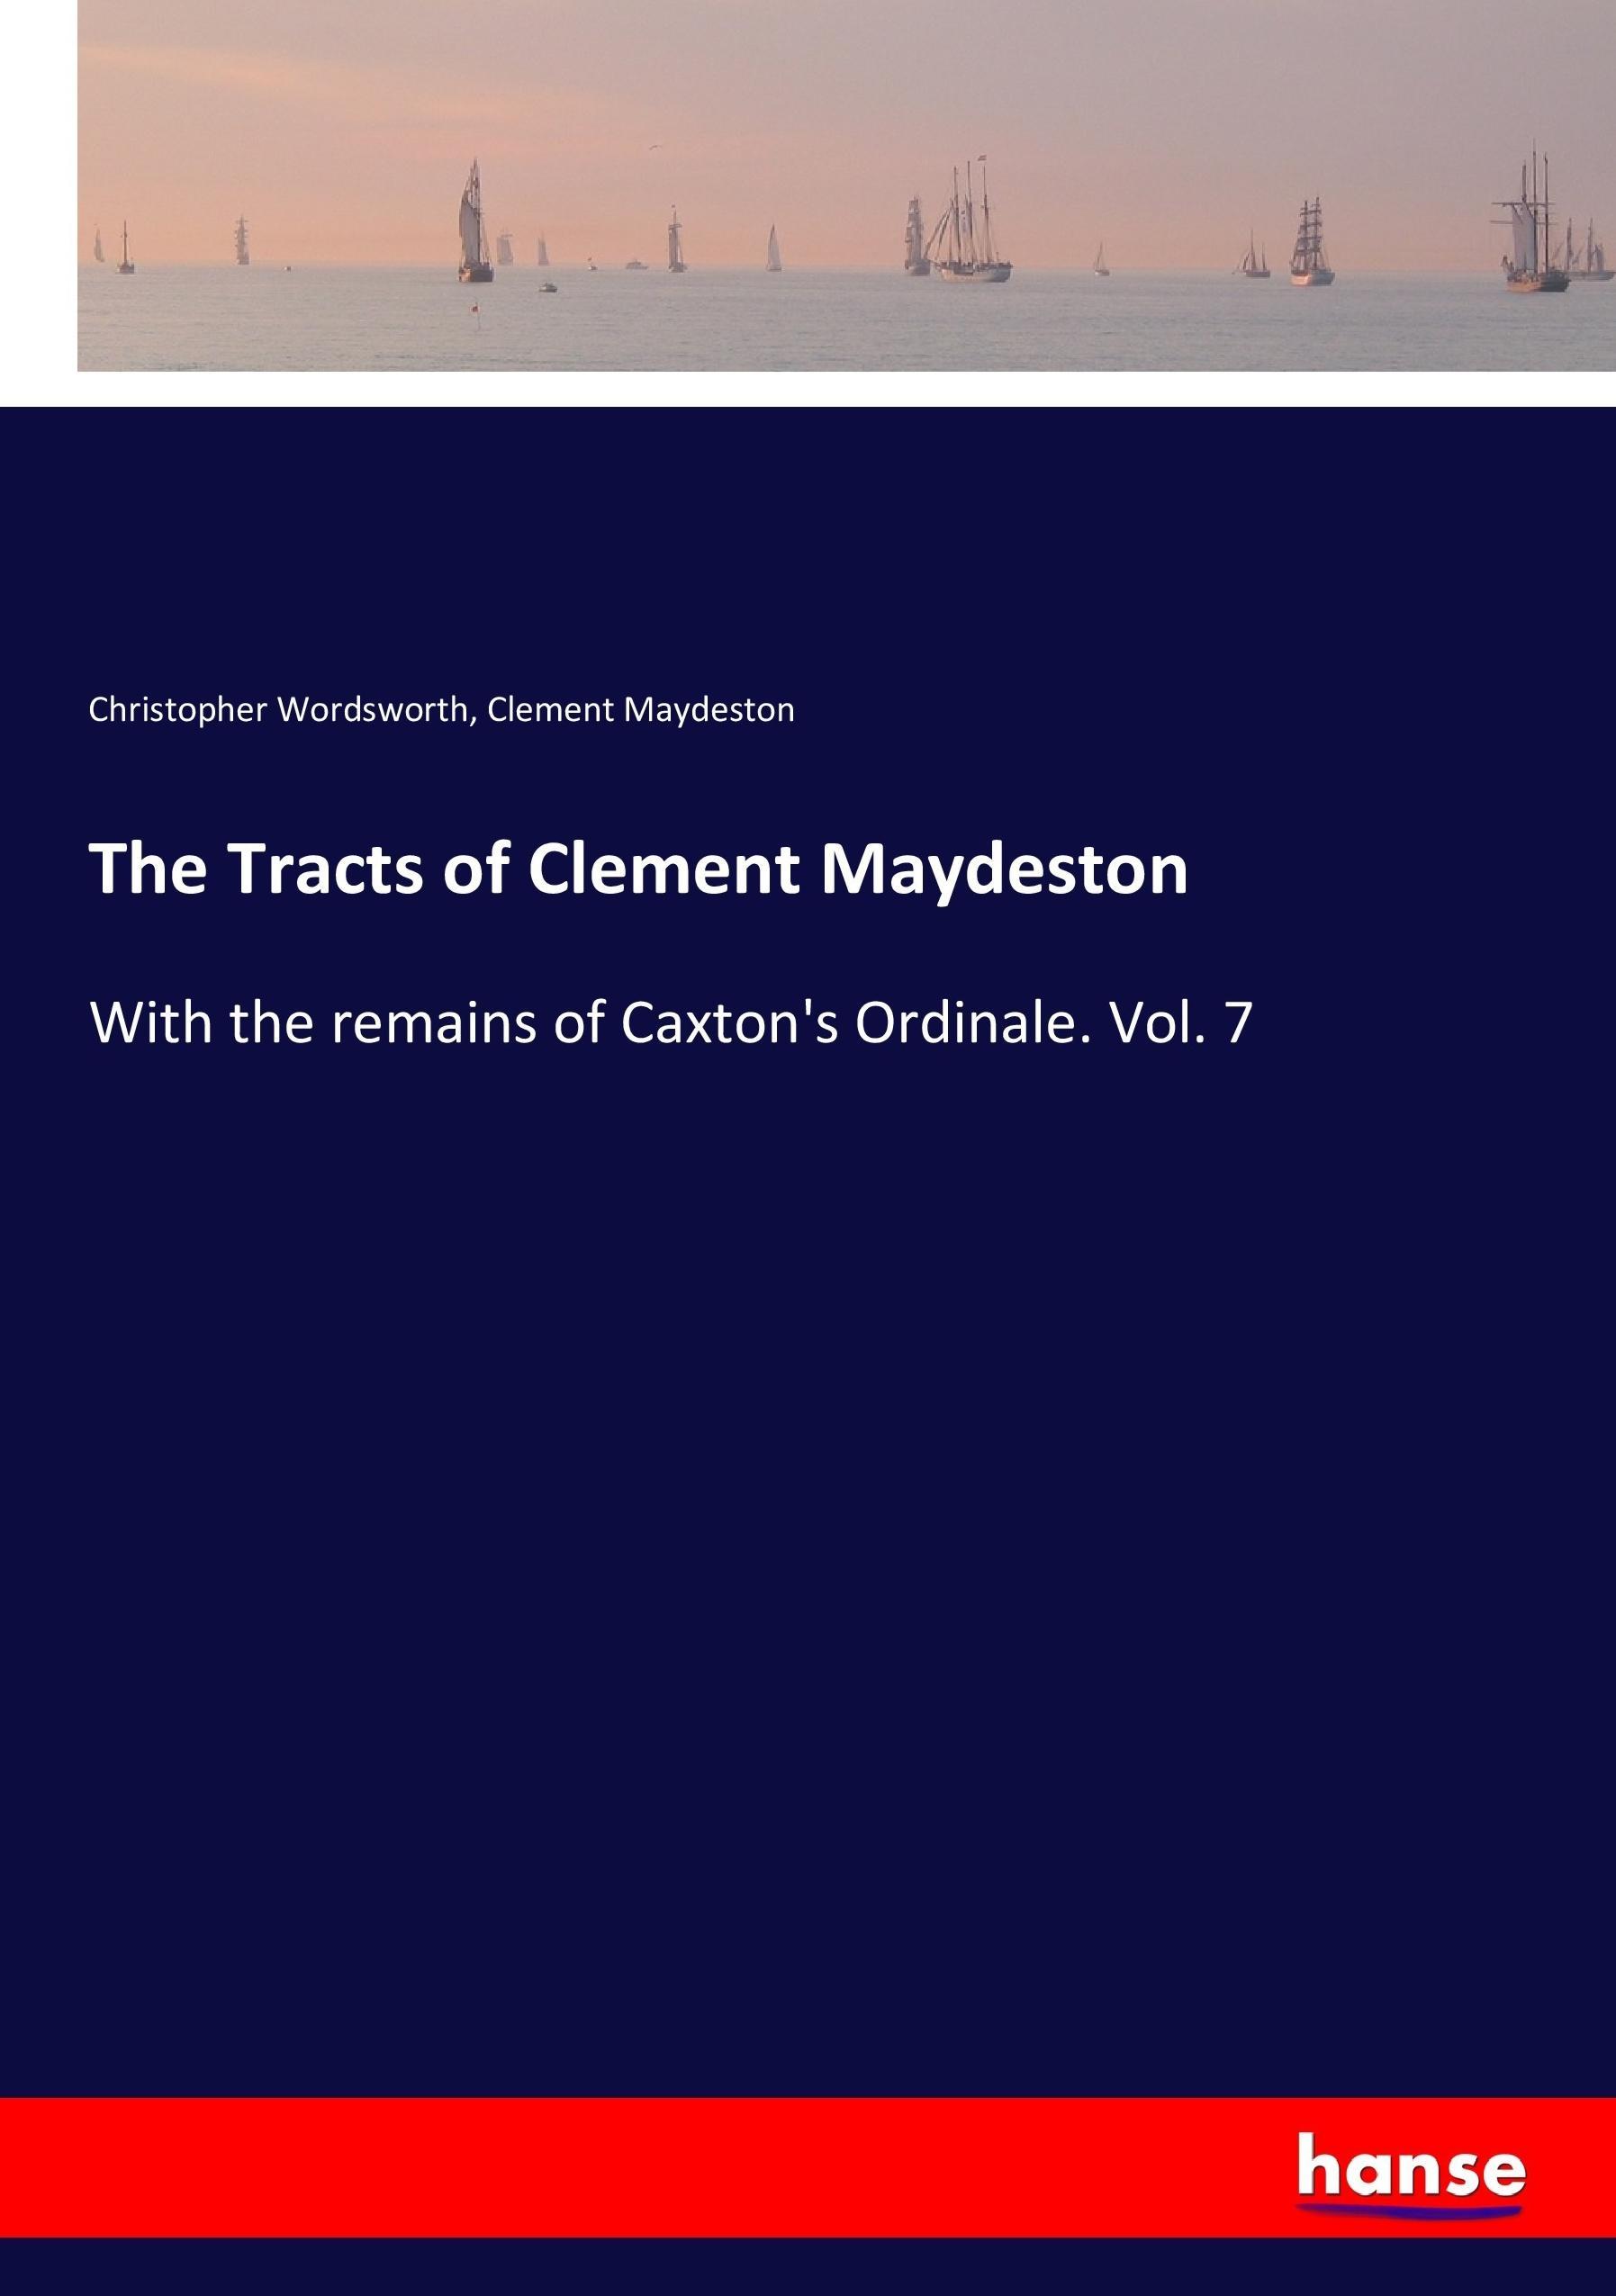 The Tracts of Clement Maydeston / With the remains of Caxton's Ordinale. Vol. 7 / Christopher Wordsworth (u. a.) / Taschenbuch / Paperback / 312 S. / Englisch / 2017 / hansebooks / EAN 9783337105259 - Wordsworth, Christopher